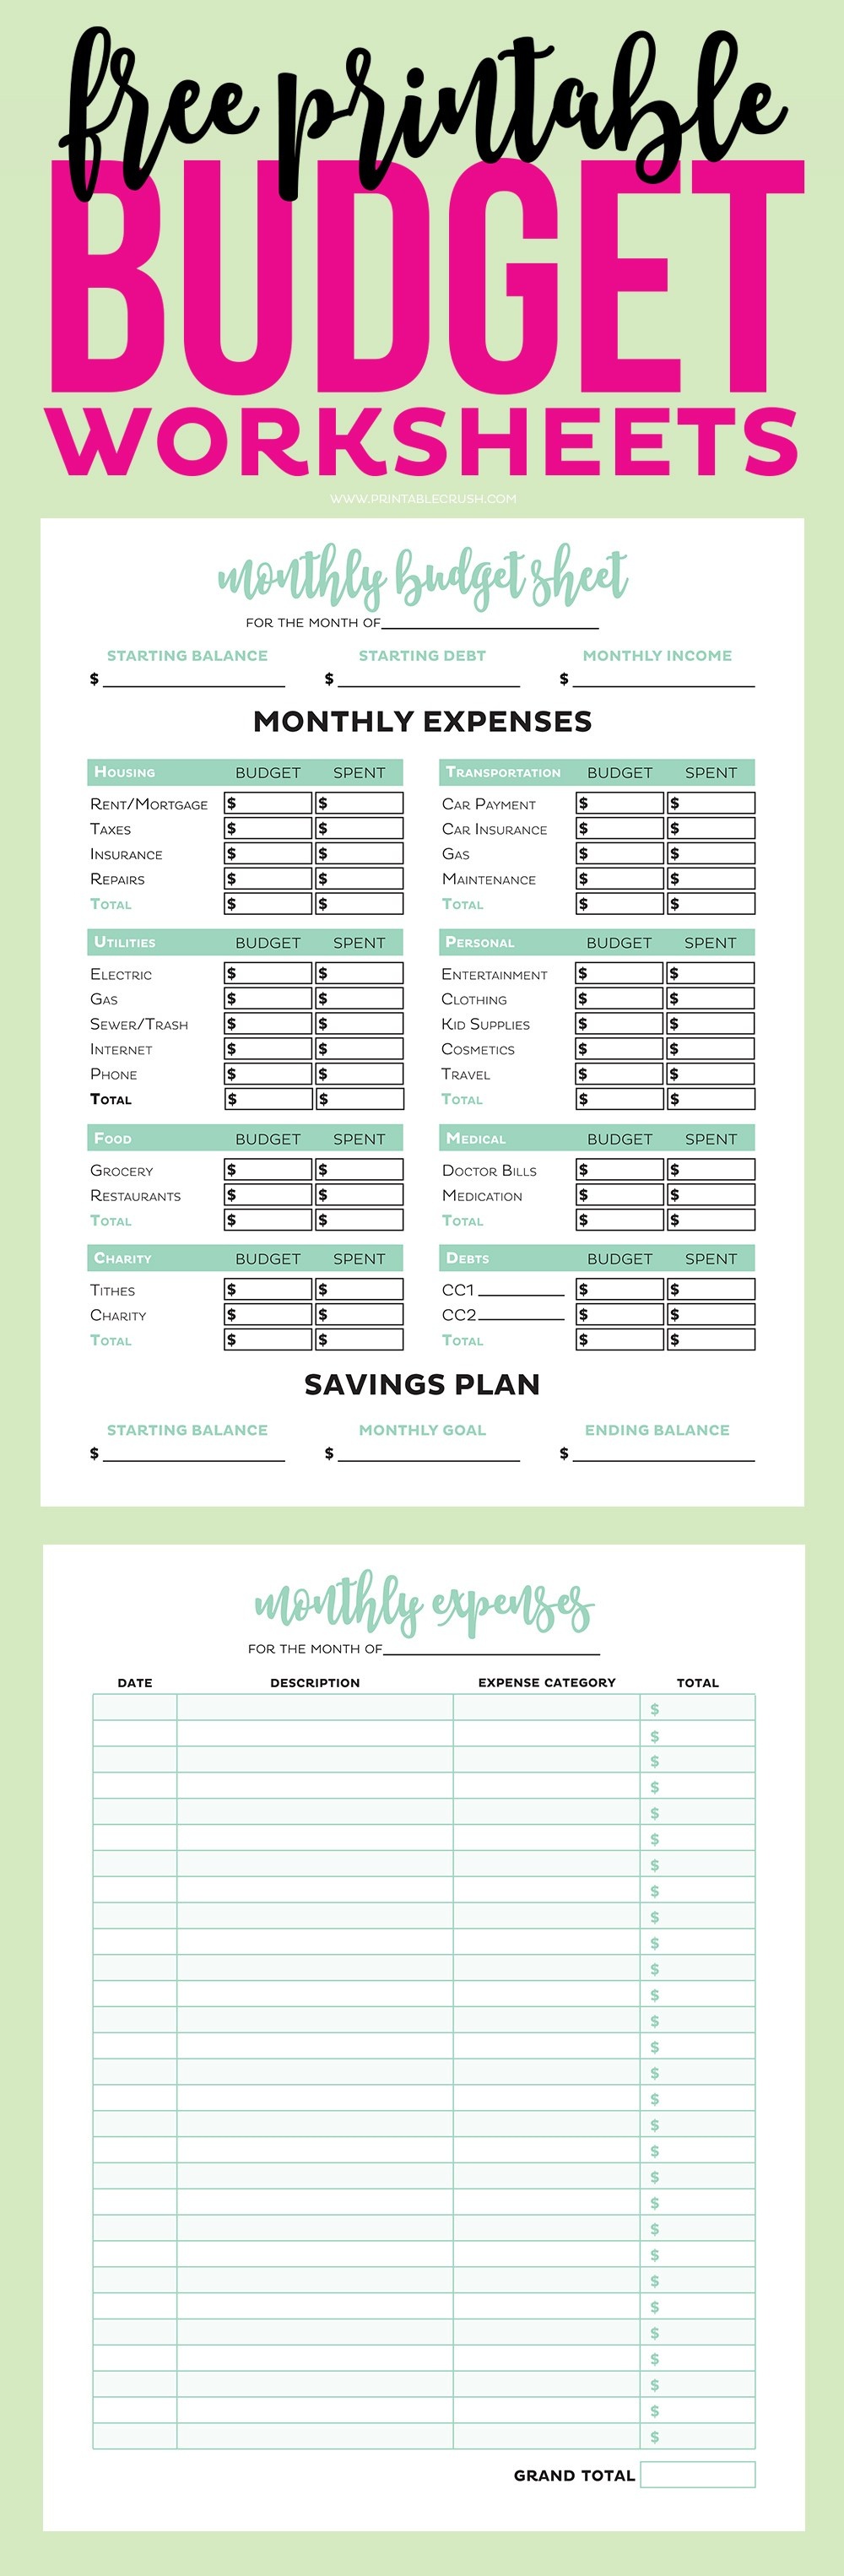 Simple Budget Worksheet Printable - Demir.iso-Consulting.co - Free Printable Budget Templates